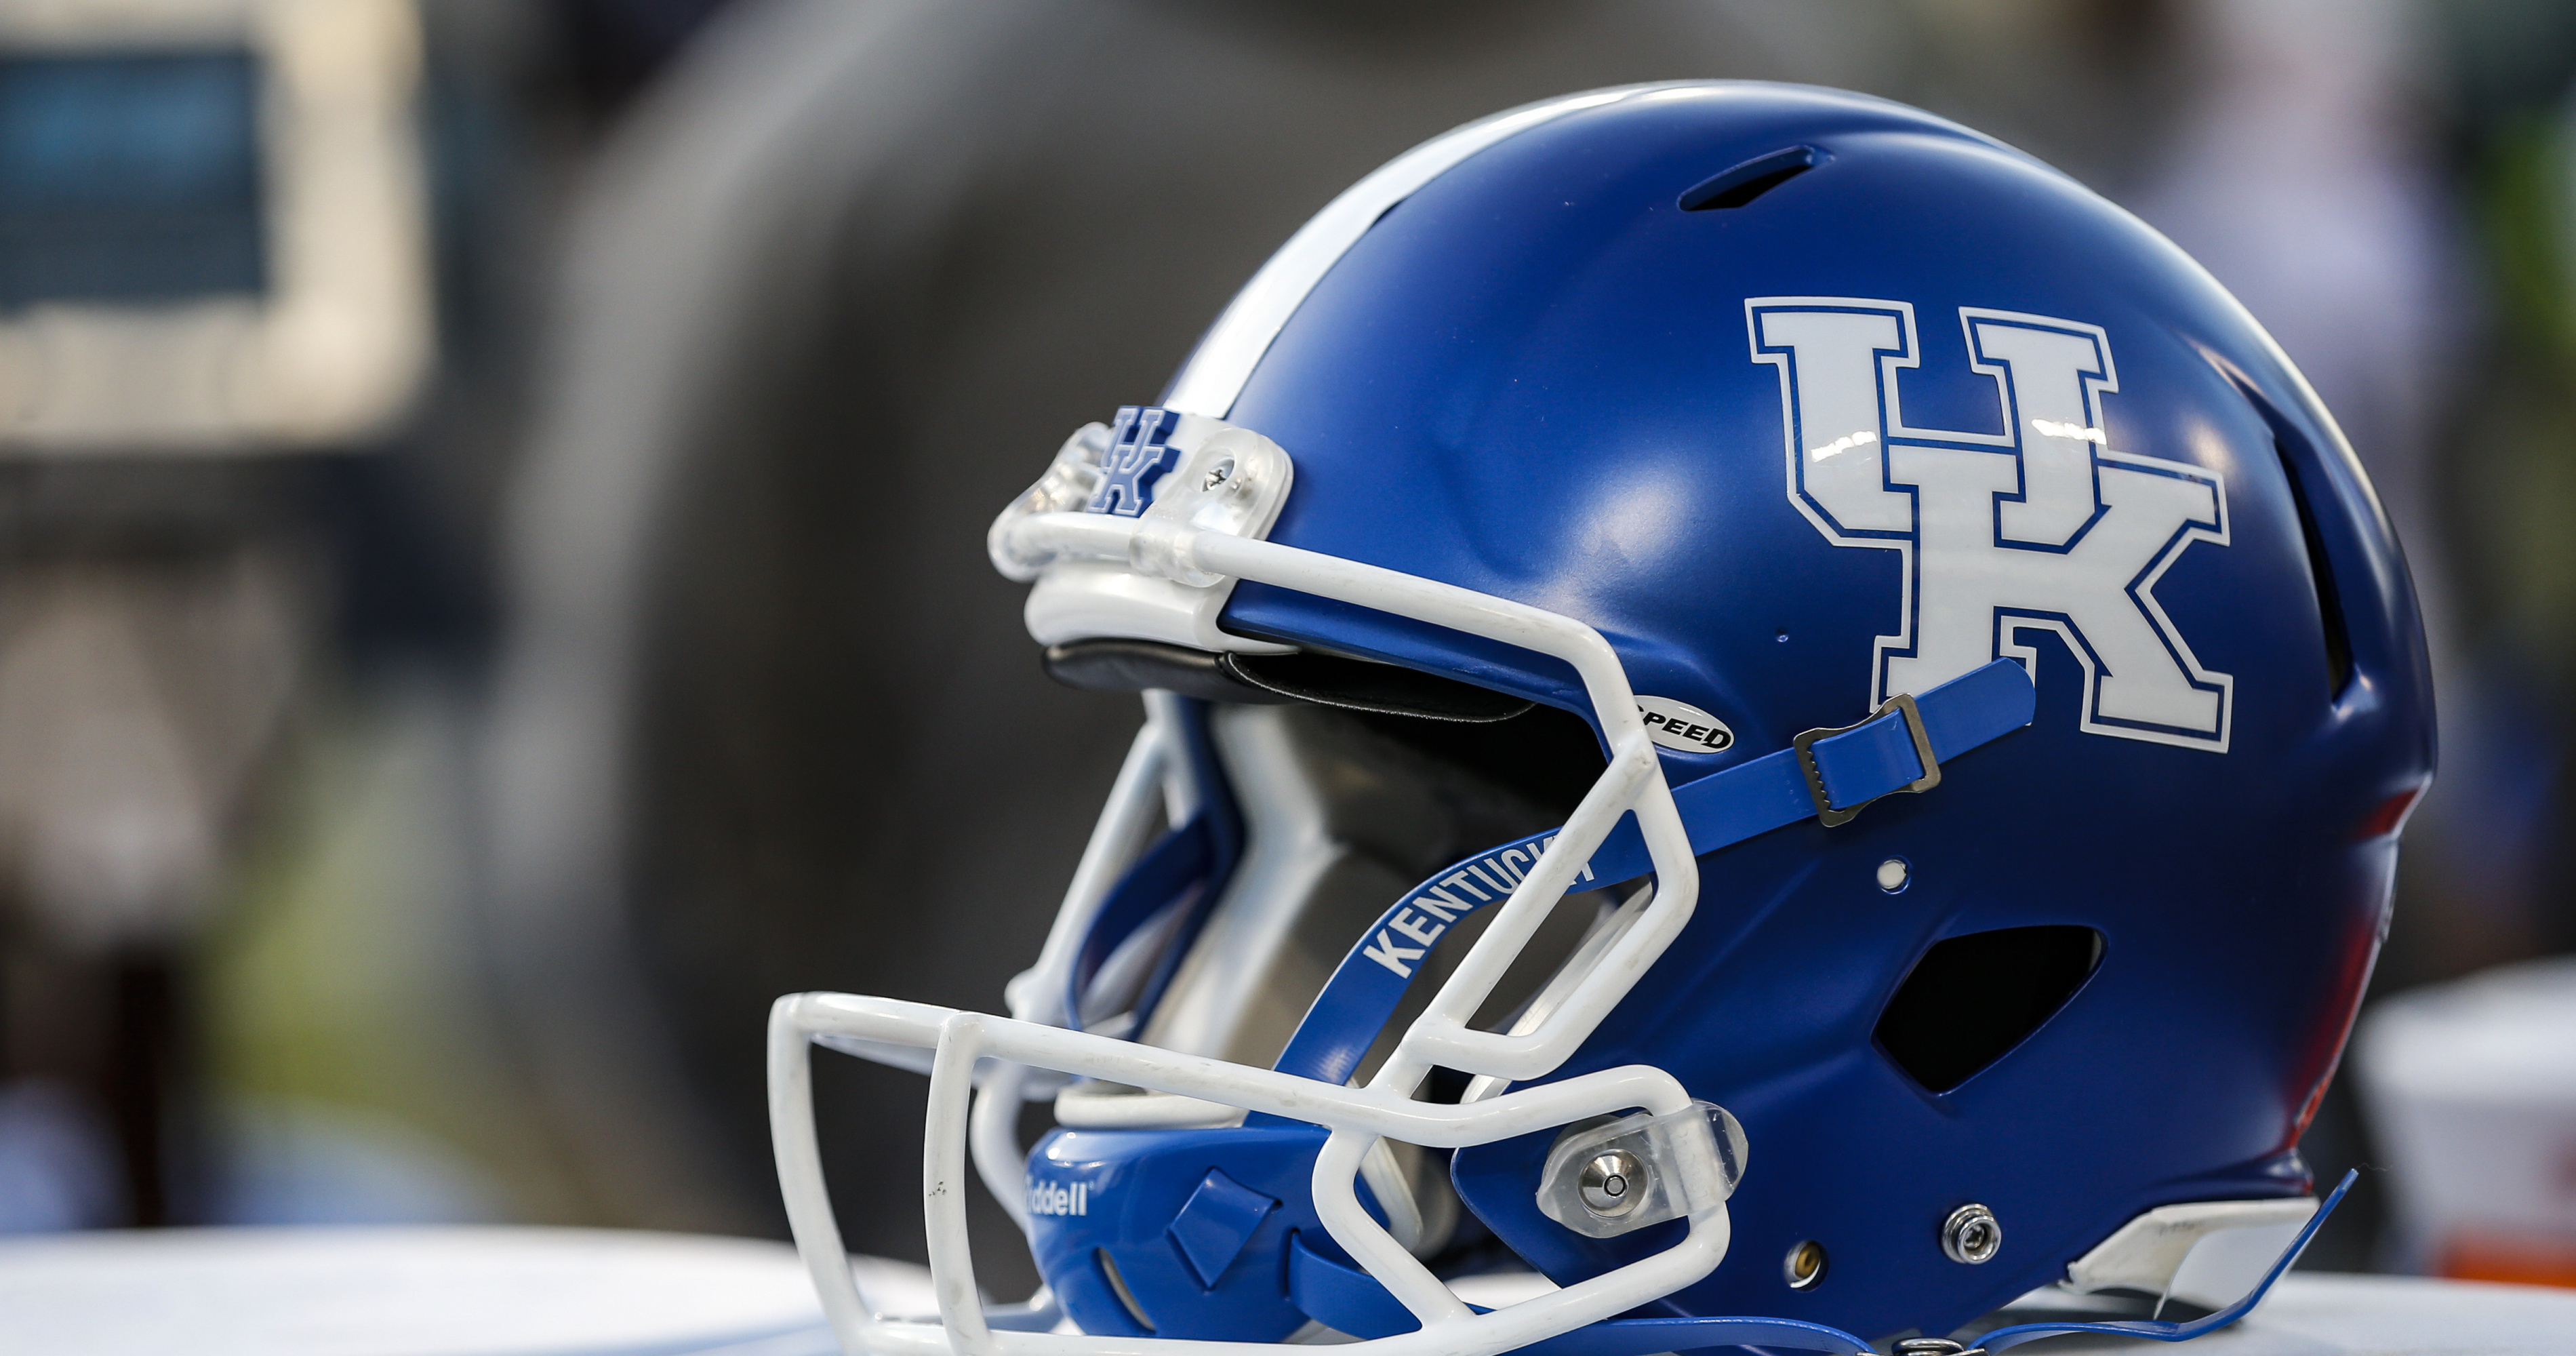 6 Kentucky Football Players Face 1stDegree Burglary Charges After